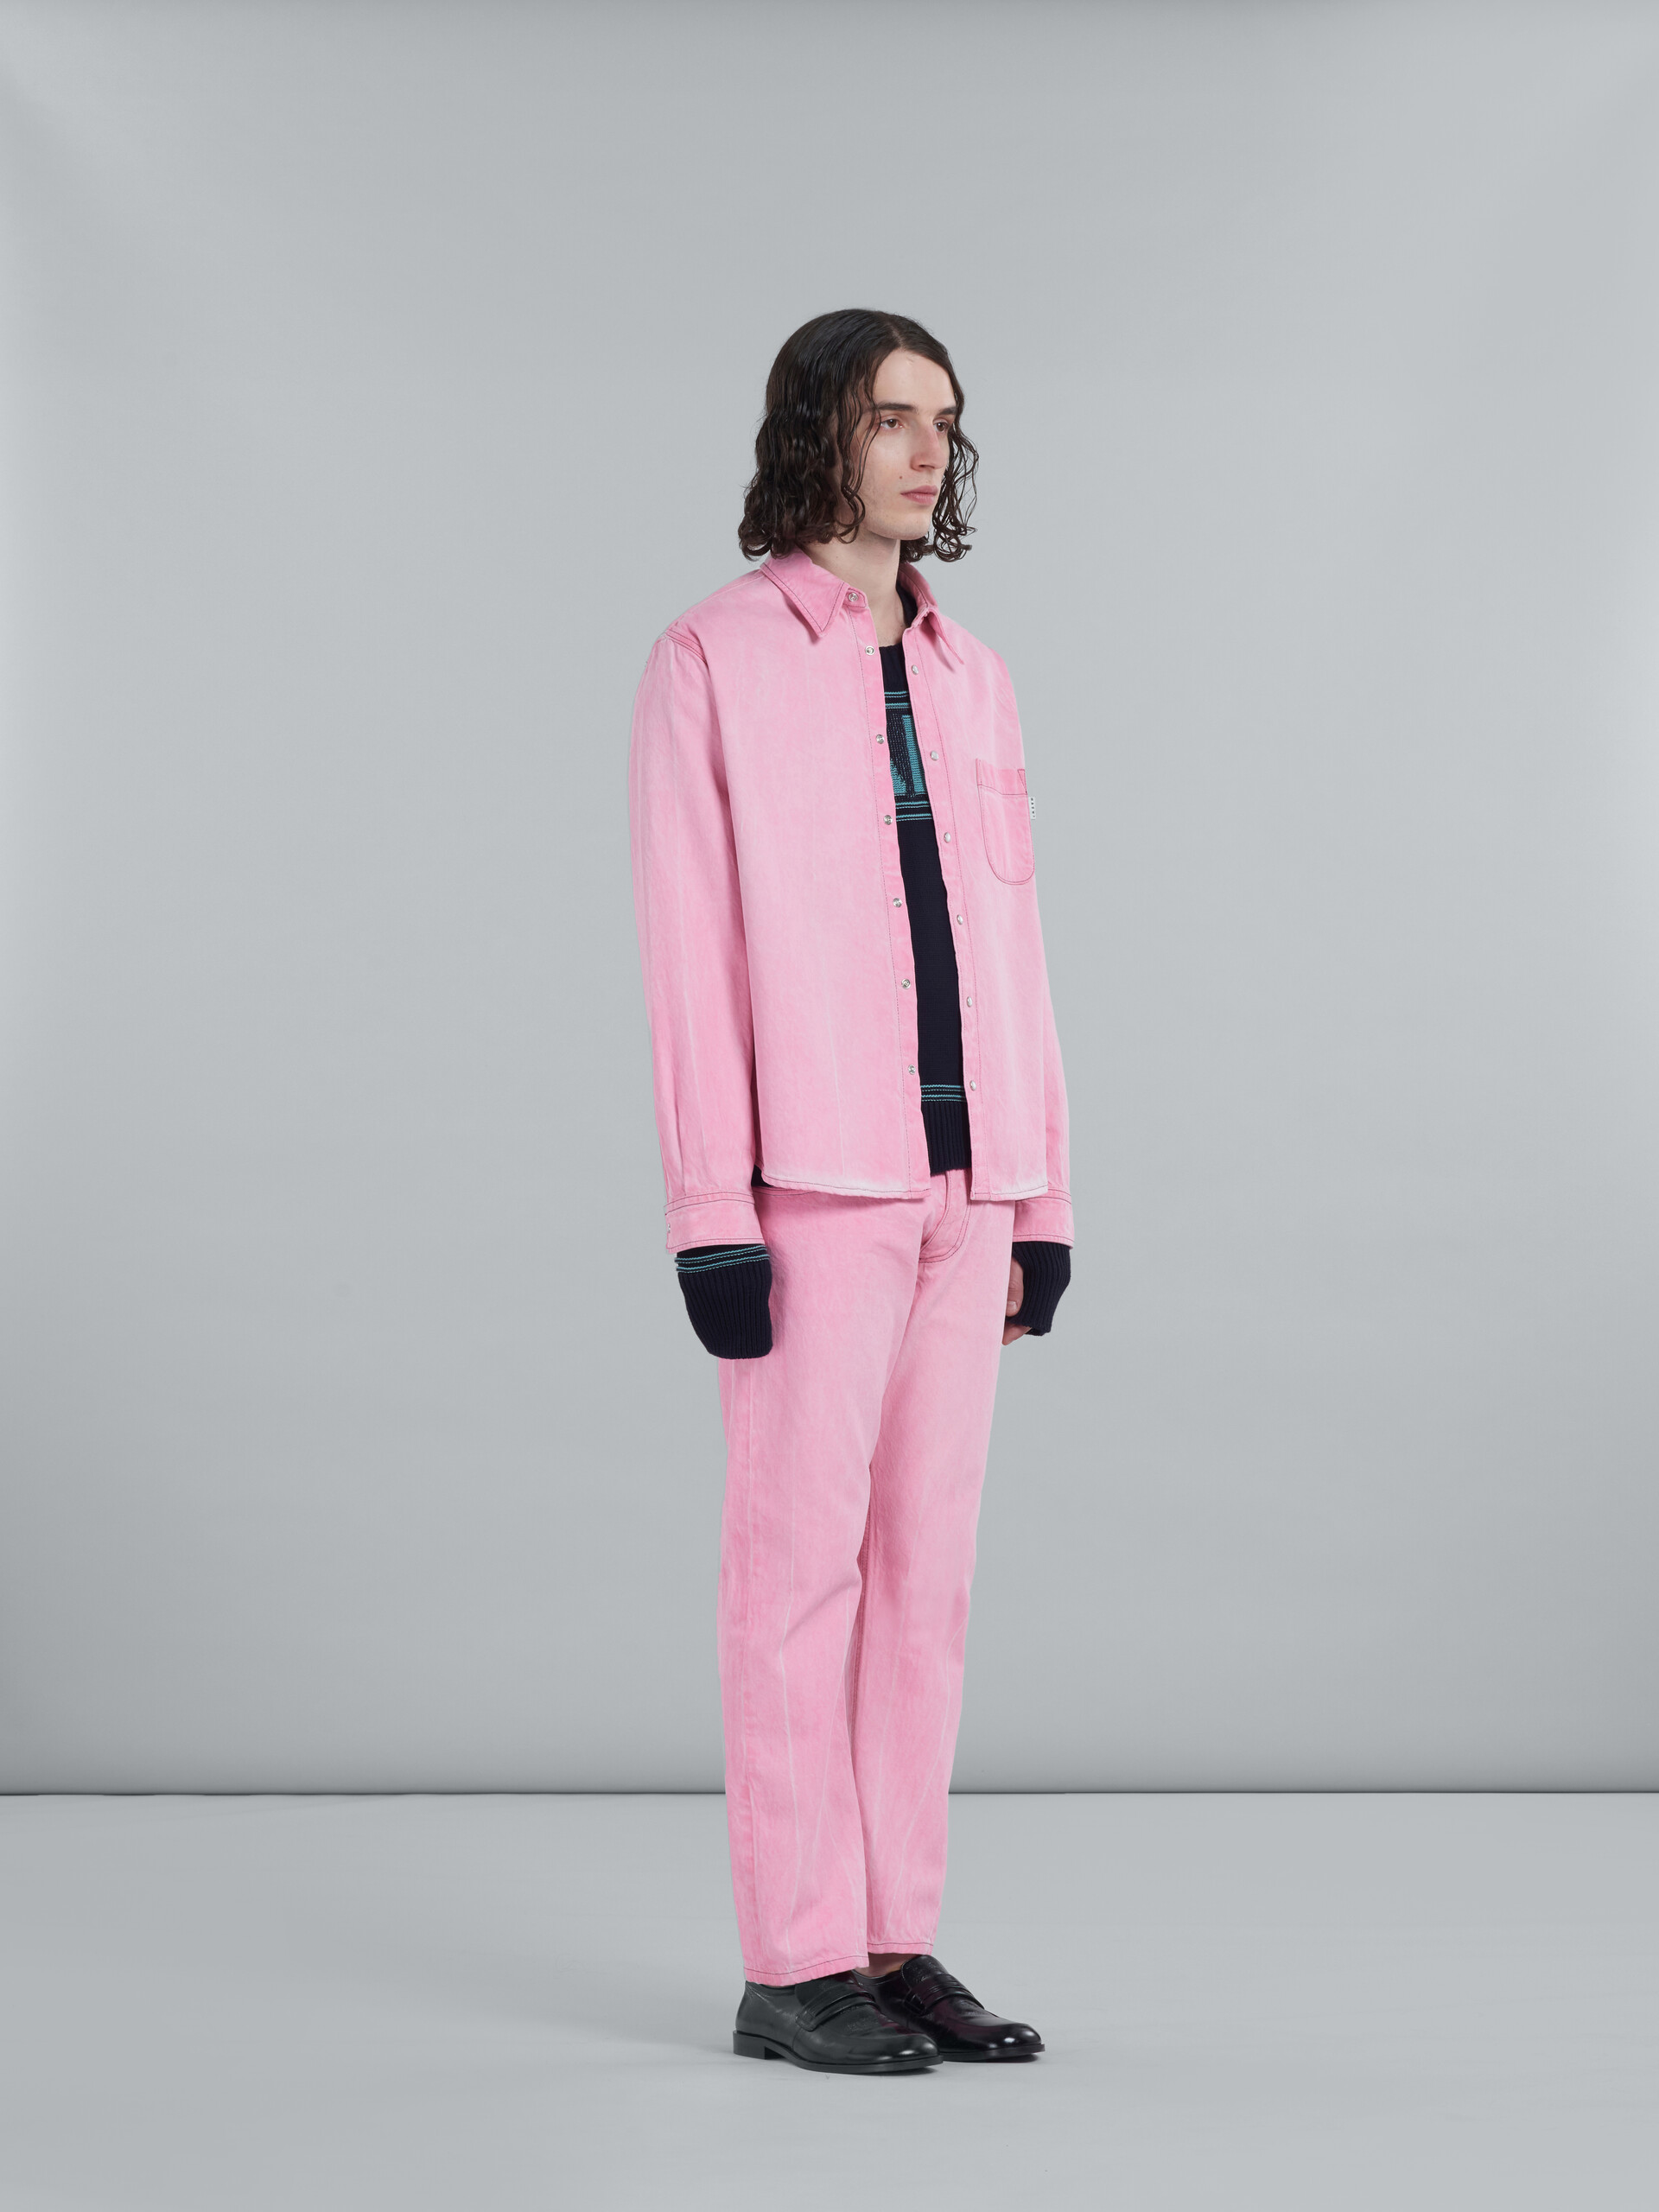 Straight trousers in pink cotton drill - Pants - Image 5